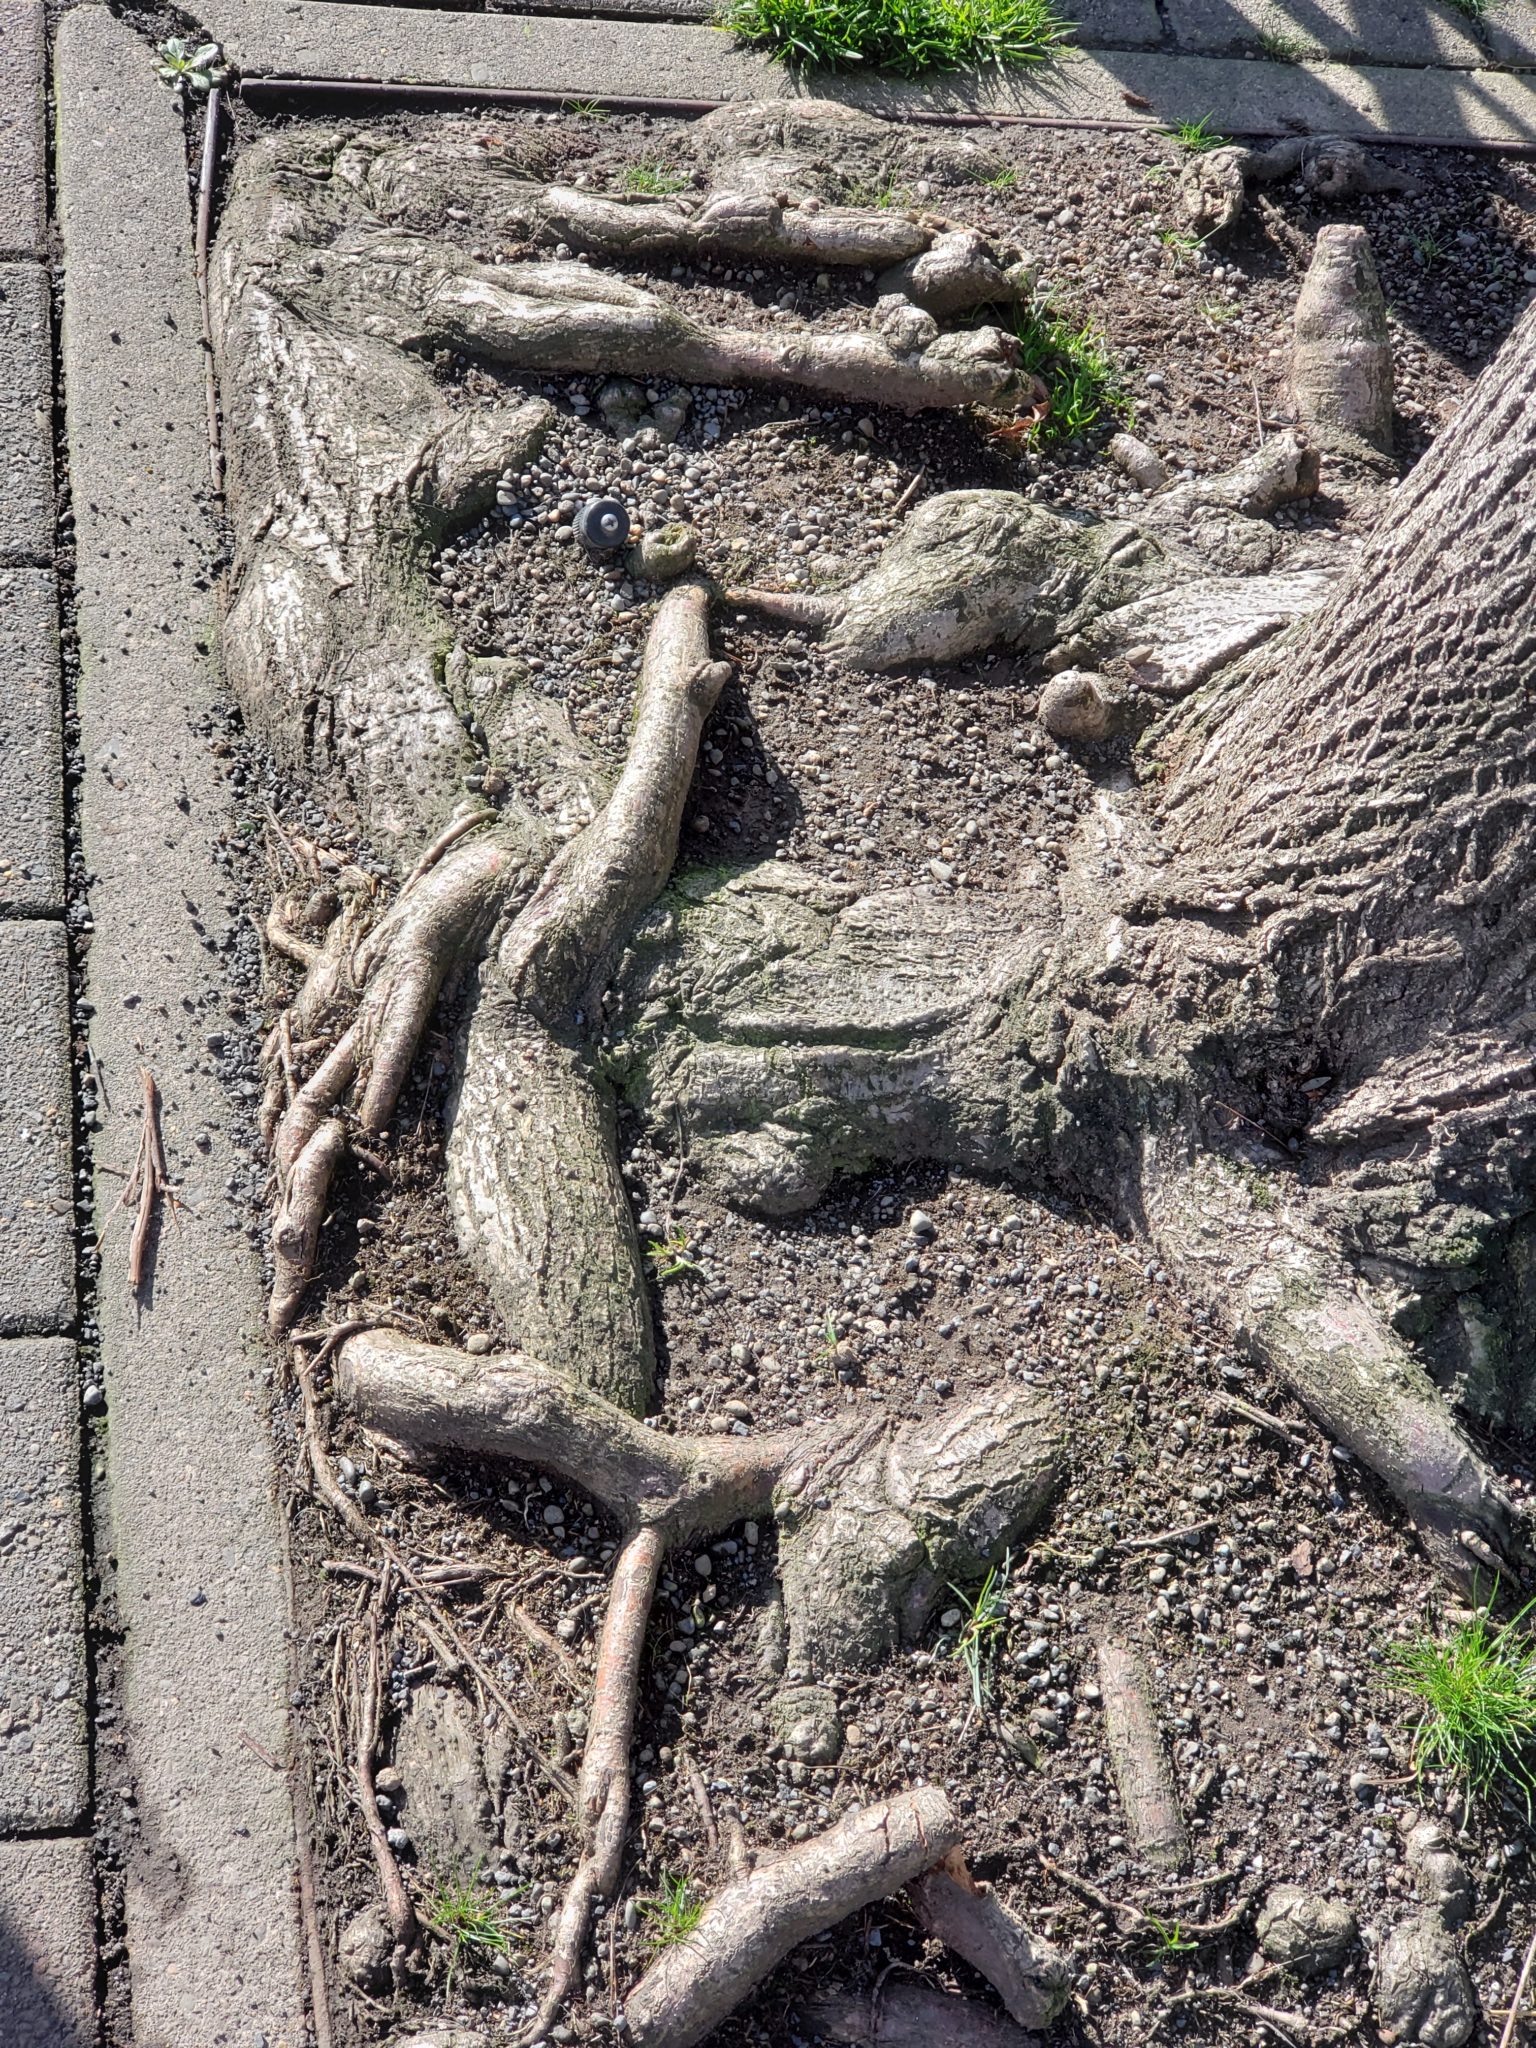 Tree with limited root growth